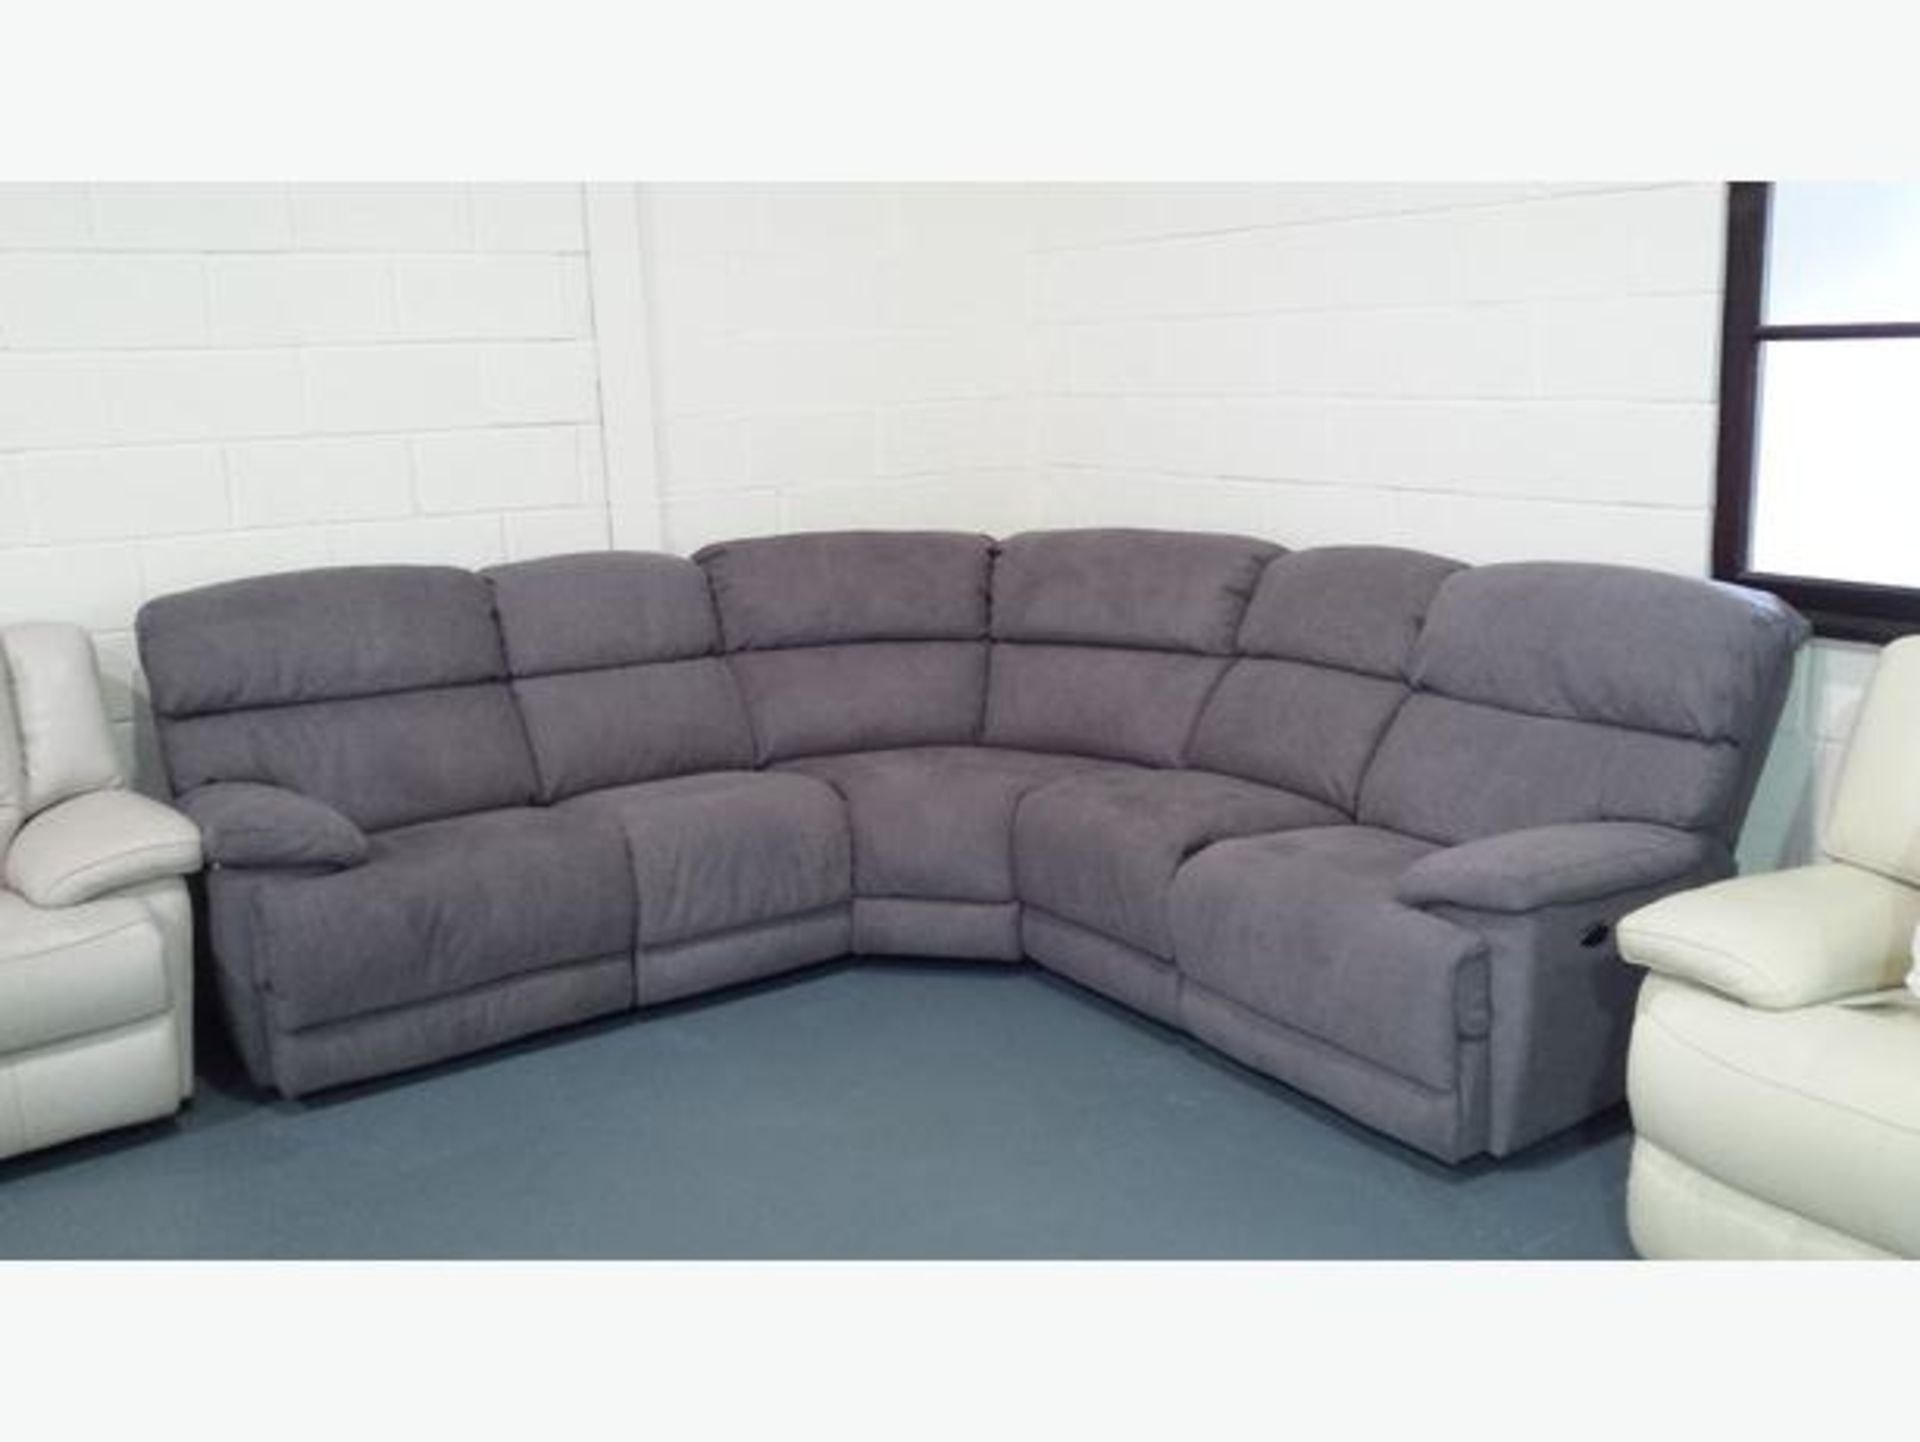 Brand new direct from the manufacturers supreme valance reclining corner sofa in light grey fabric